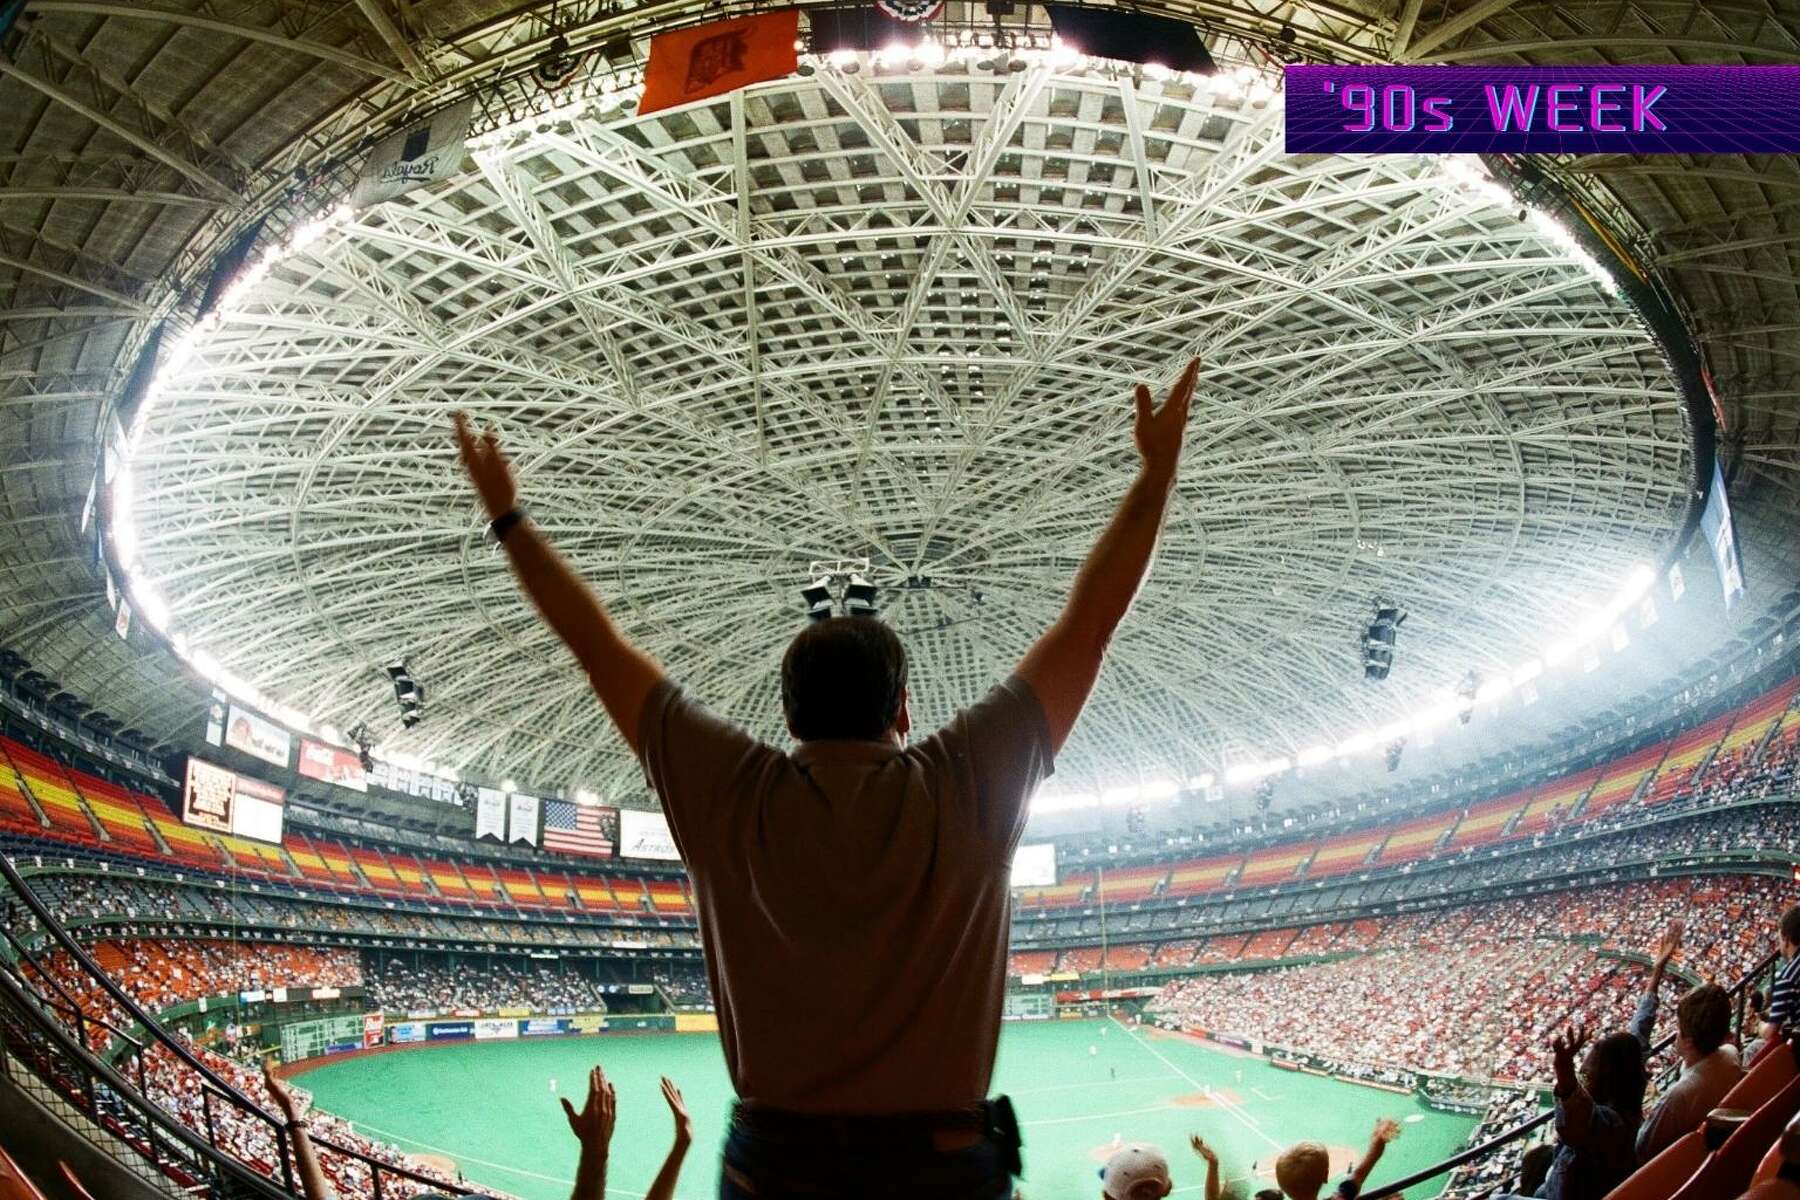 Gallery: Astros celebrate 50th anniversary of the Astrodome - The